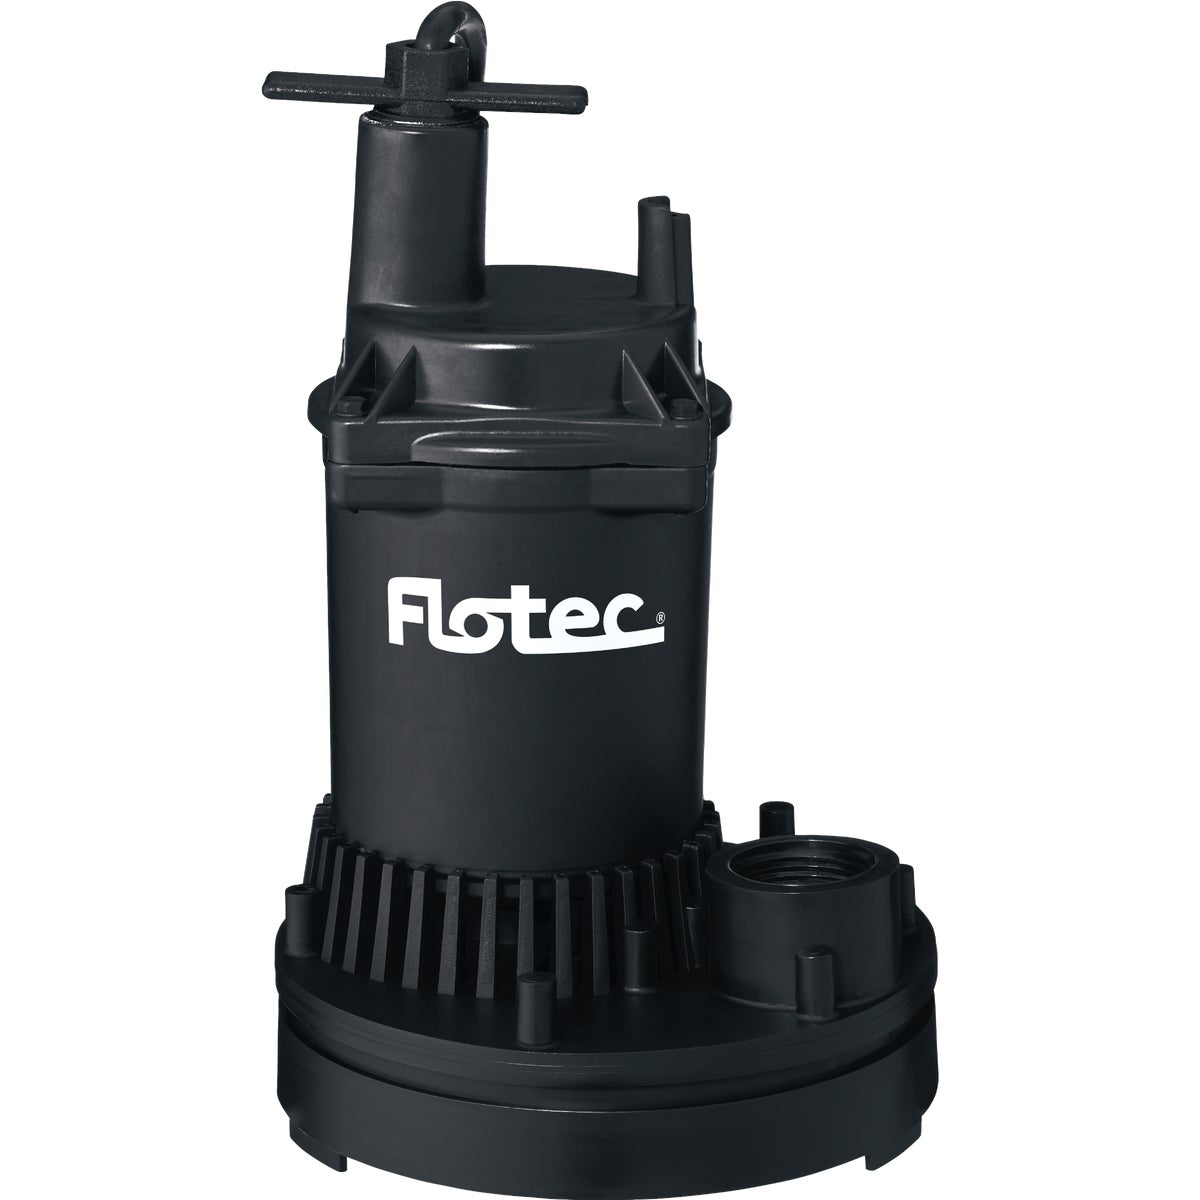 Item 410241, Good, dependable performance marks the Flotec FP0S1250X as the solution for